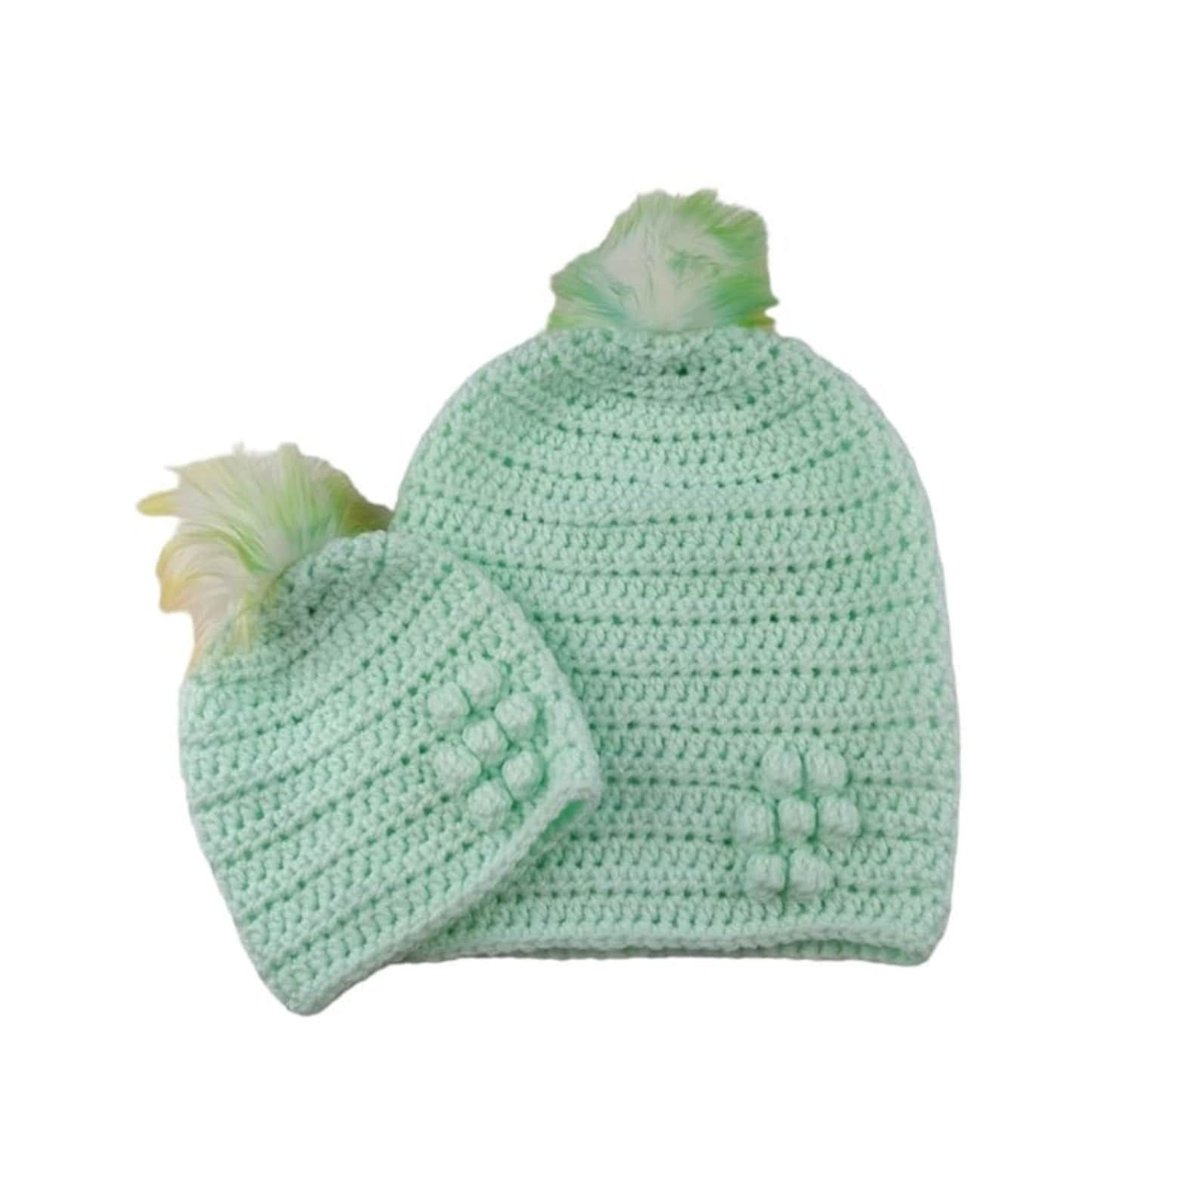 Stay stylish with these handmade green crocheted hats, perfect for mummy and baby. Adorned with a flower detail and detachable faux fur pompoms. Get yours today! knittingtopia.etsy.com/listing/168535… #MummyAndBaby #HandmadeHats #knittingtopia #etsy #craftbizparty #MHHSBD